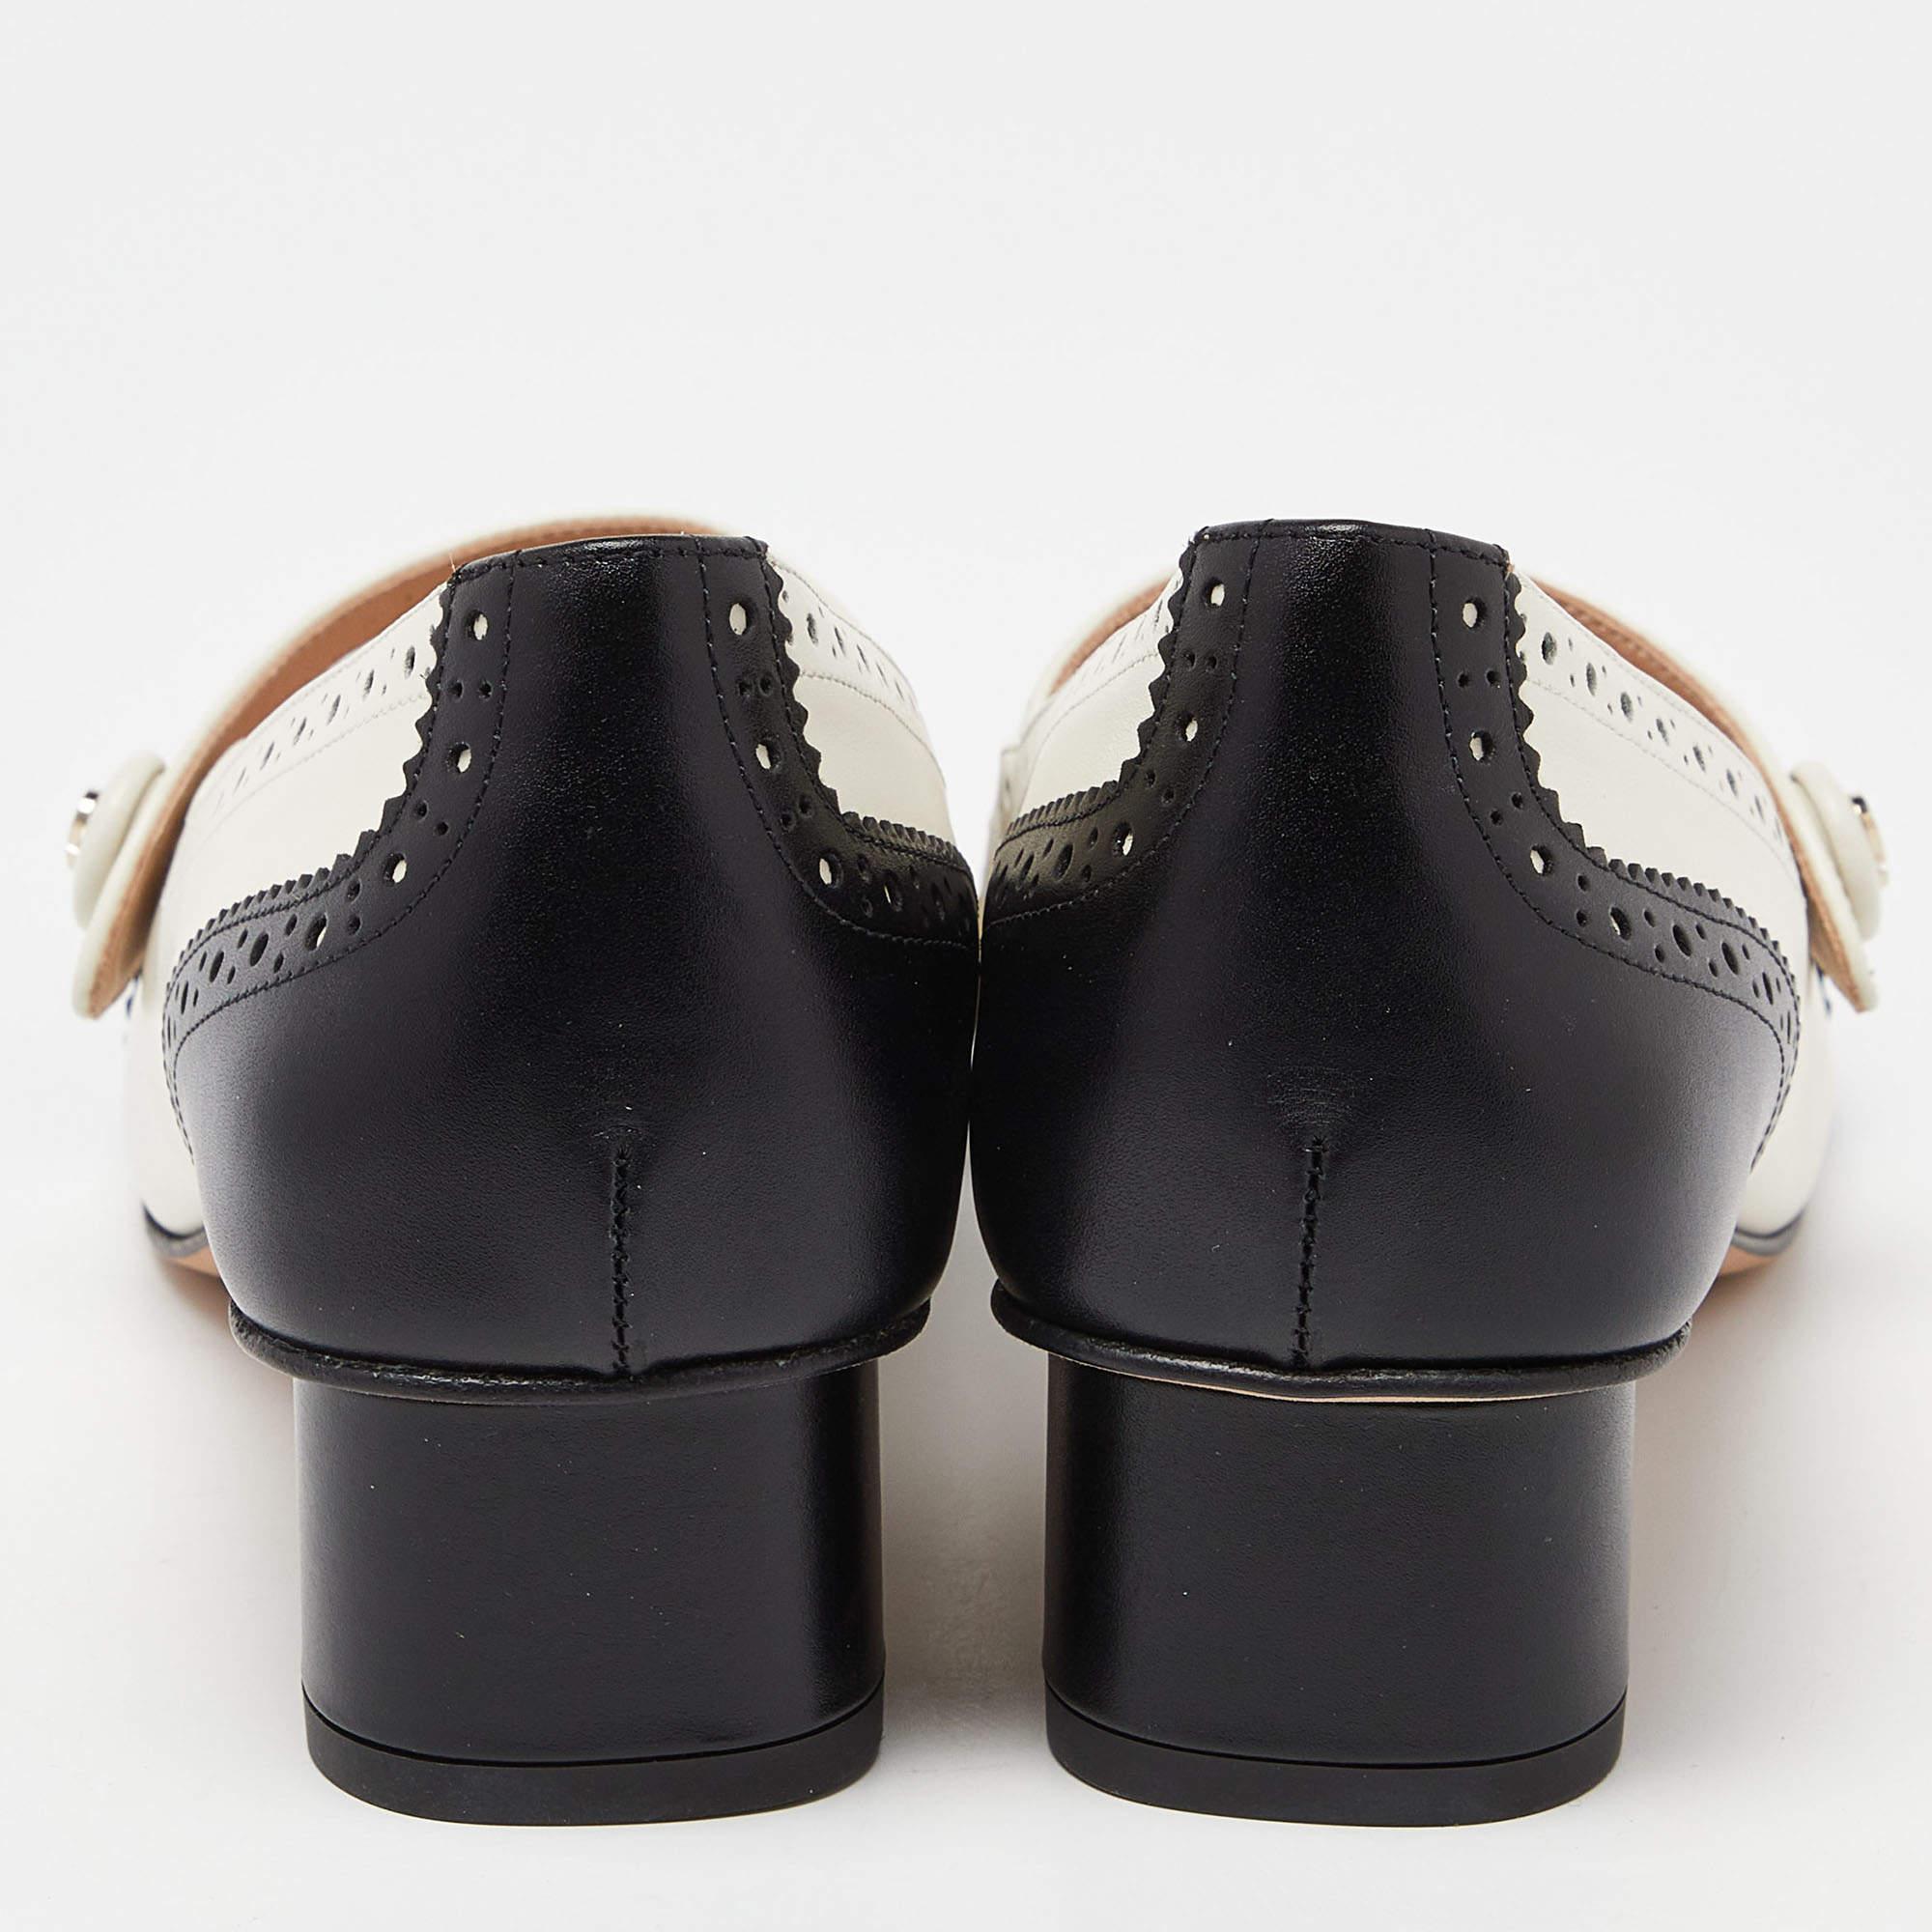 Dior Black/Cream Leather Mary Jane Pumps Size 38 2